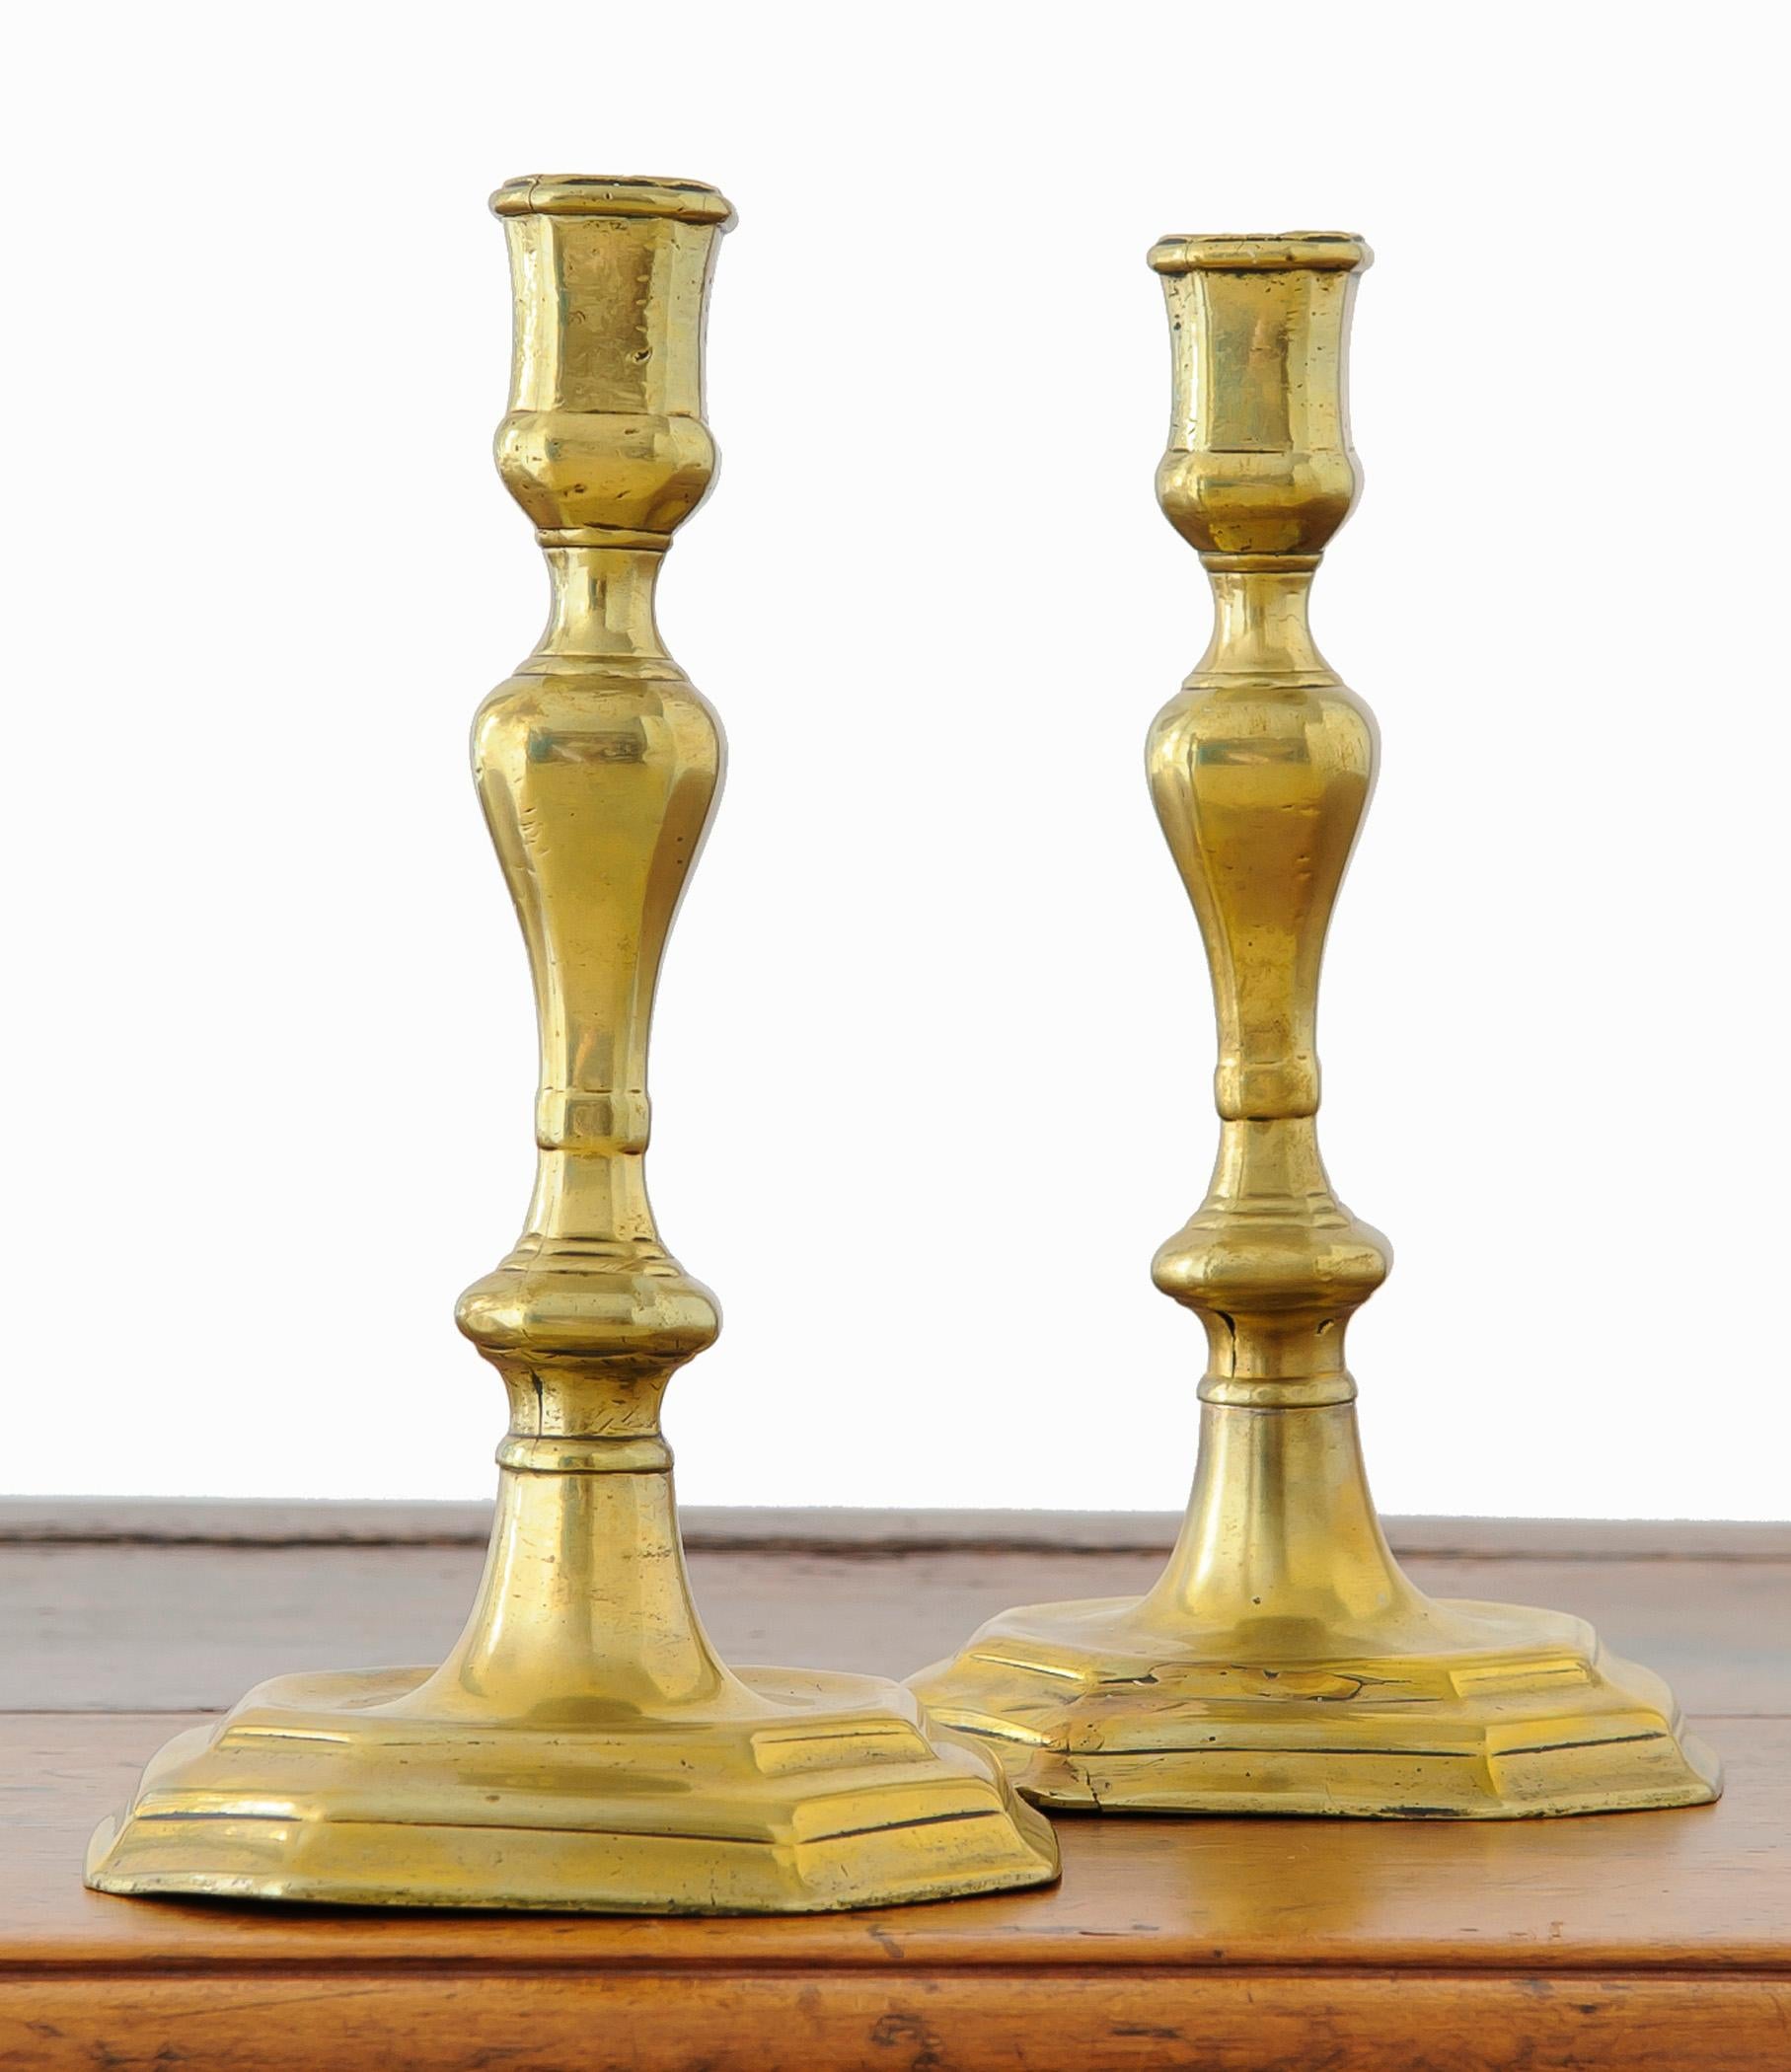 Pair of Louis XV, Regence period, bronze candlesticks.  The candlesticks have a shell and asymmetrical rocaille motif.  The candlestick base is a soft cornered hexagon with the shell and curl repeated.  The candlesticks are of heavy weight.   